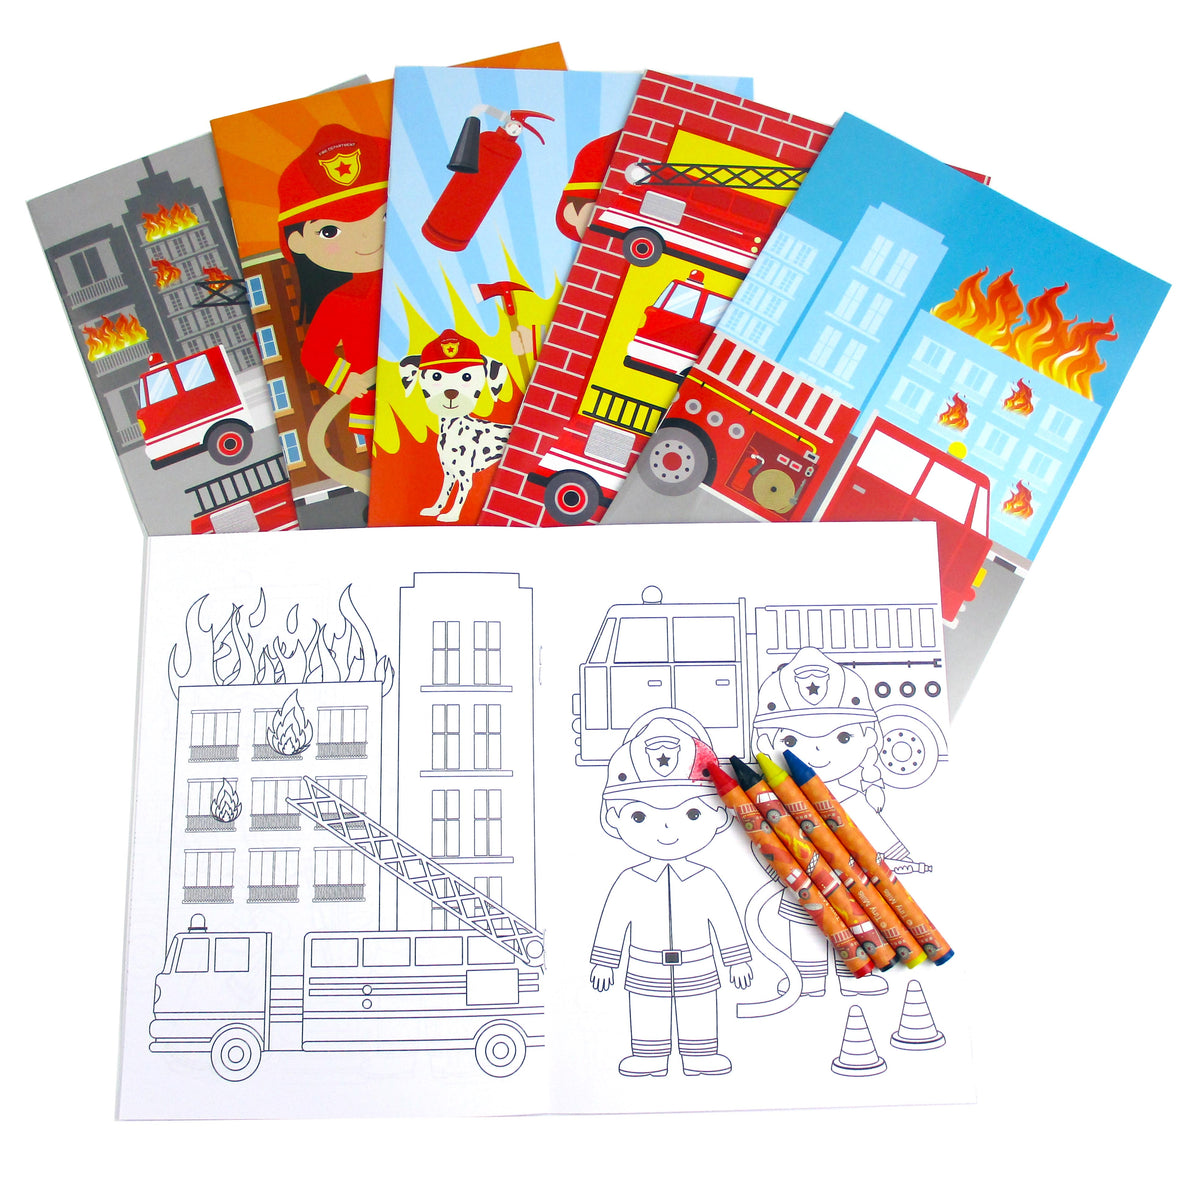 Fire Truck Coloring Books for Kids Ages 4-8: with Bonus Activity Pages,  100+ Unique Single-Sided Coloring Pages, Inspire Mindfulness and  Creativity, F (Paperback)